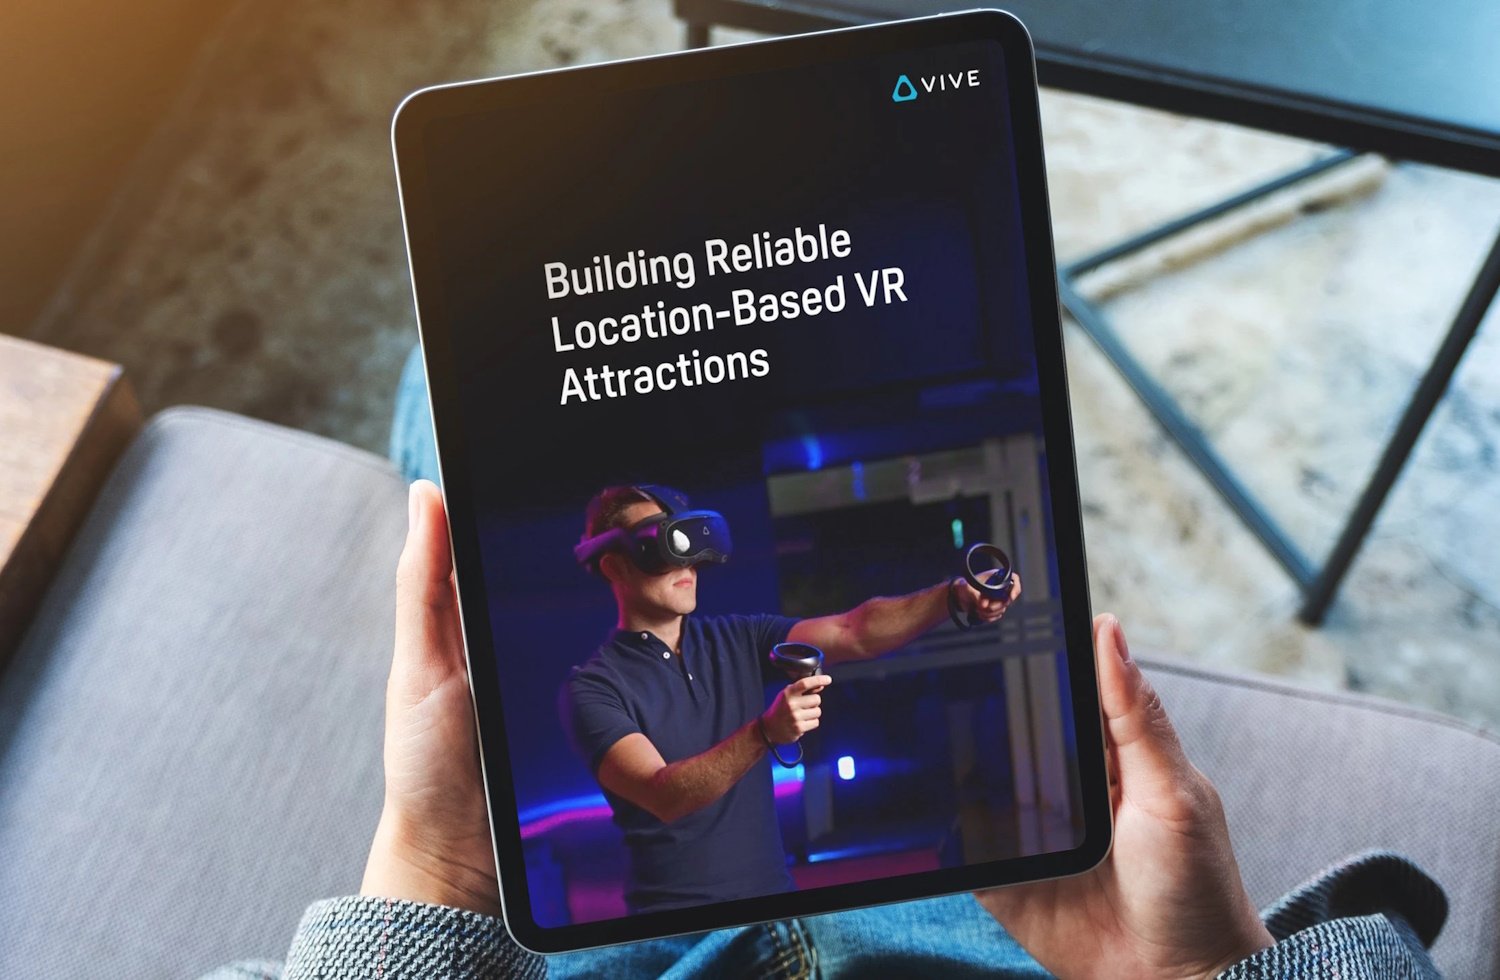 Hands hold a mobile tablet with the screen displaying the cover page of HTC Vive's report, Building Reliable Location-Based VR Attractions.